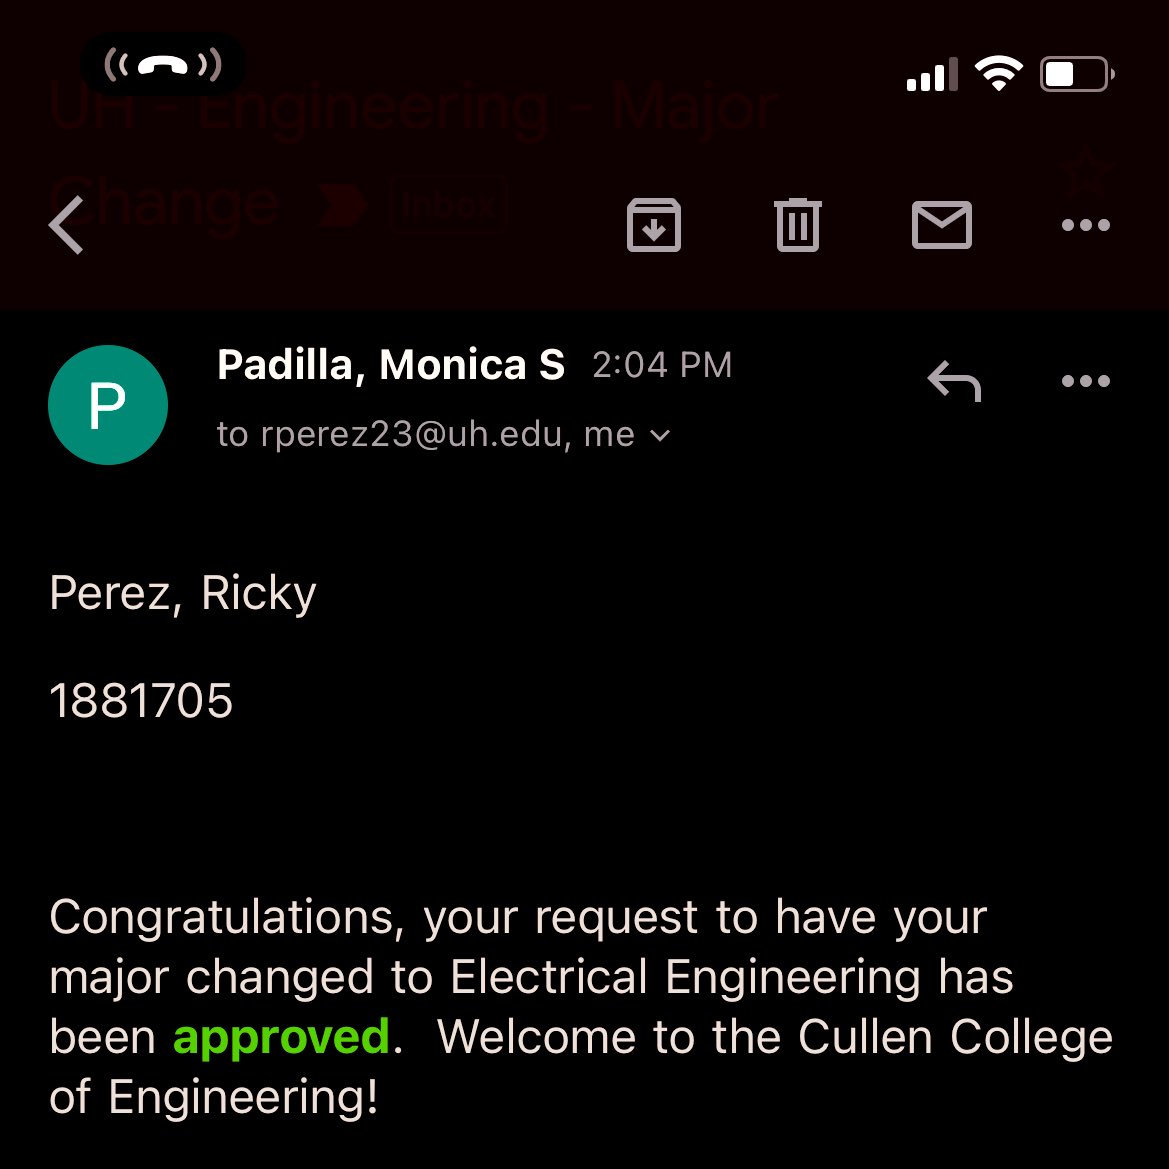 officially in the Cullen College of Engineering @ the University of Houston! 🙏🥲 #futureengineer